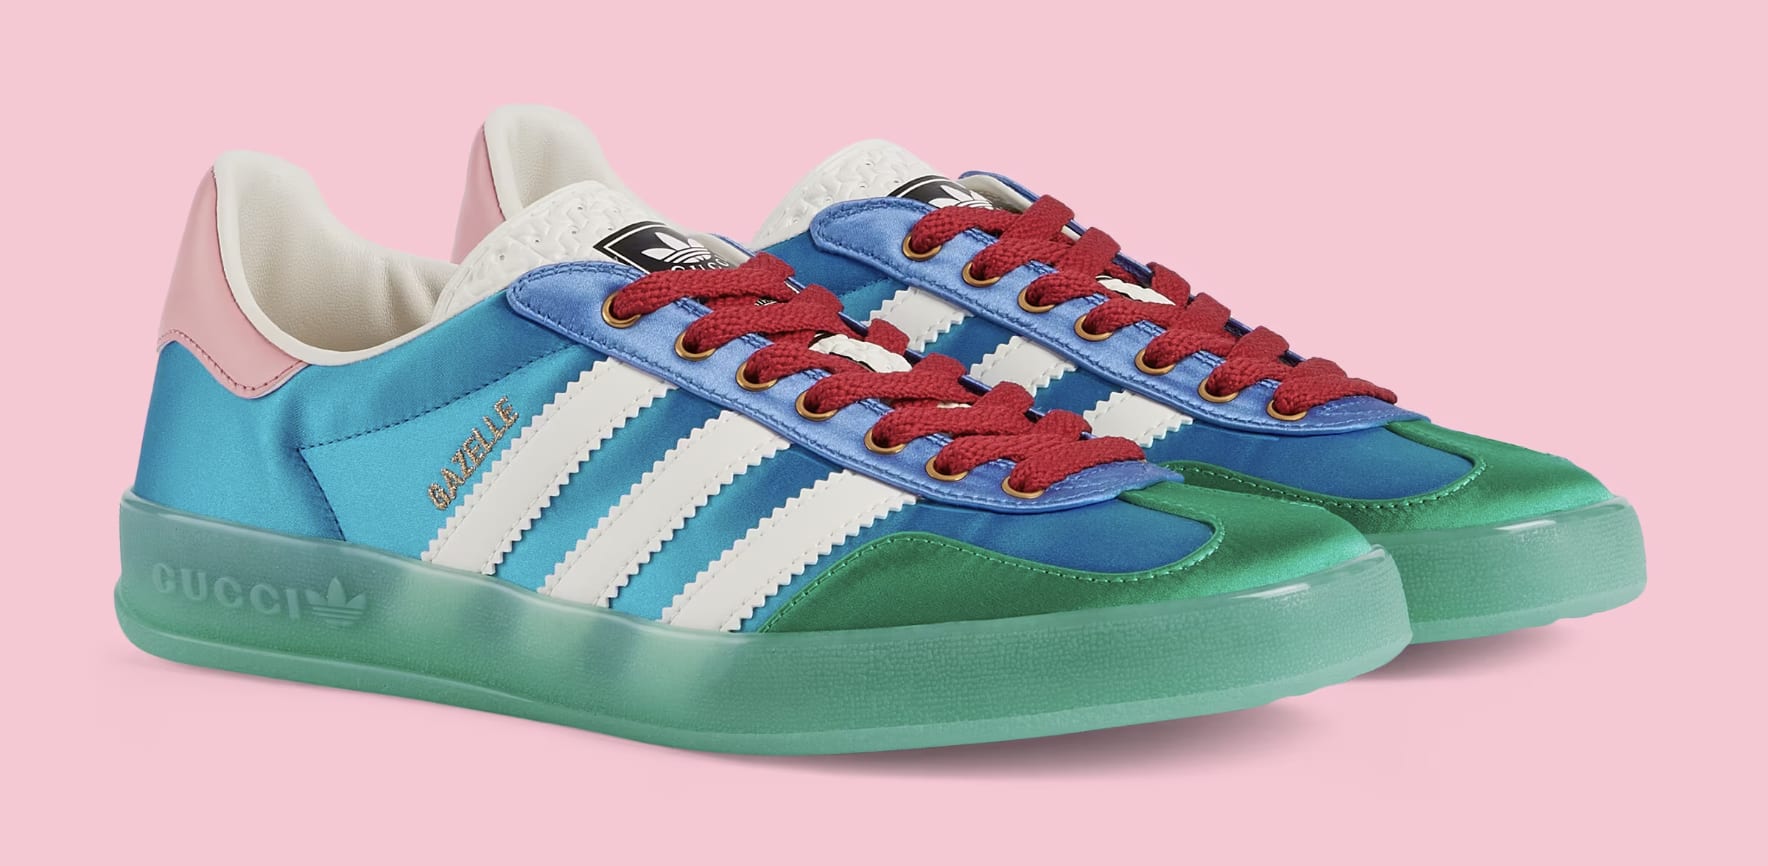 Gucci's Latest Collection Includes A Collab With Adidas